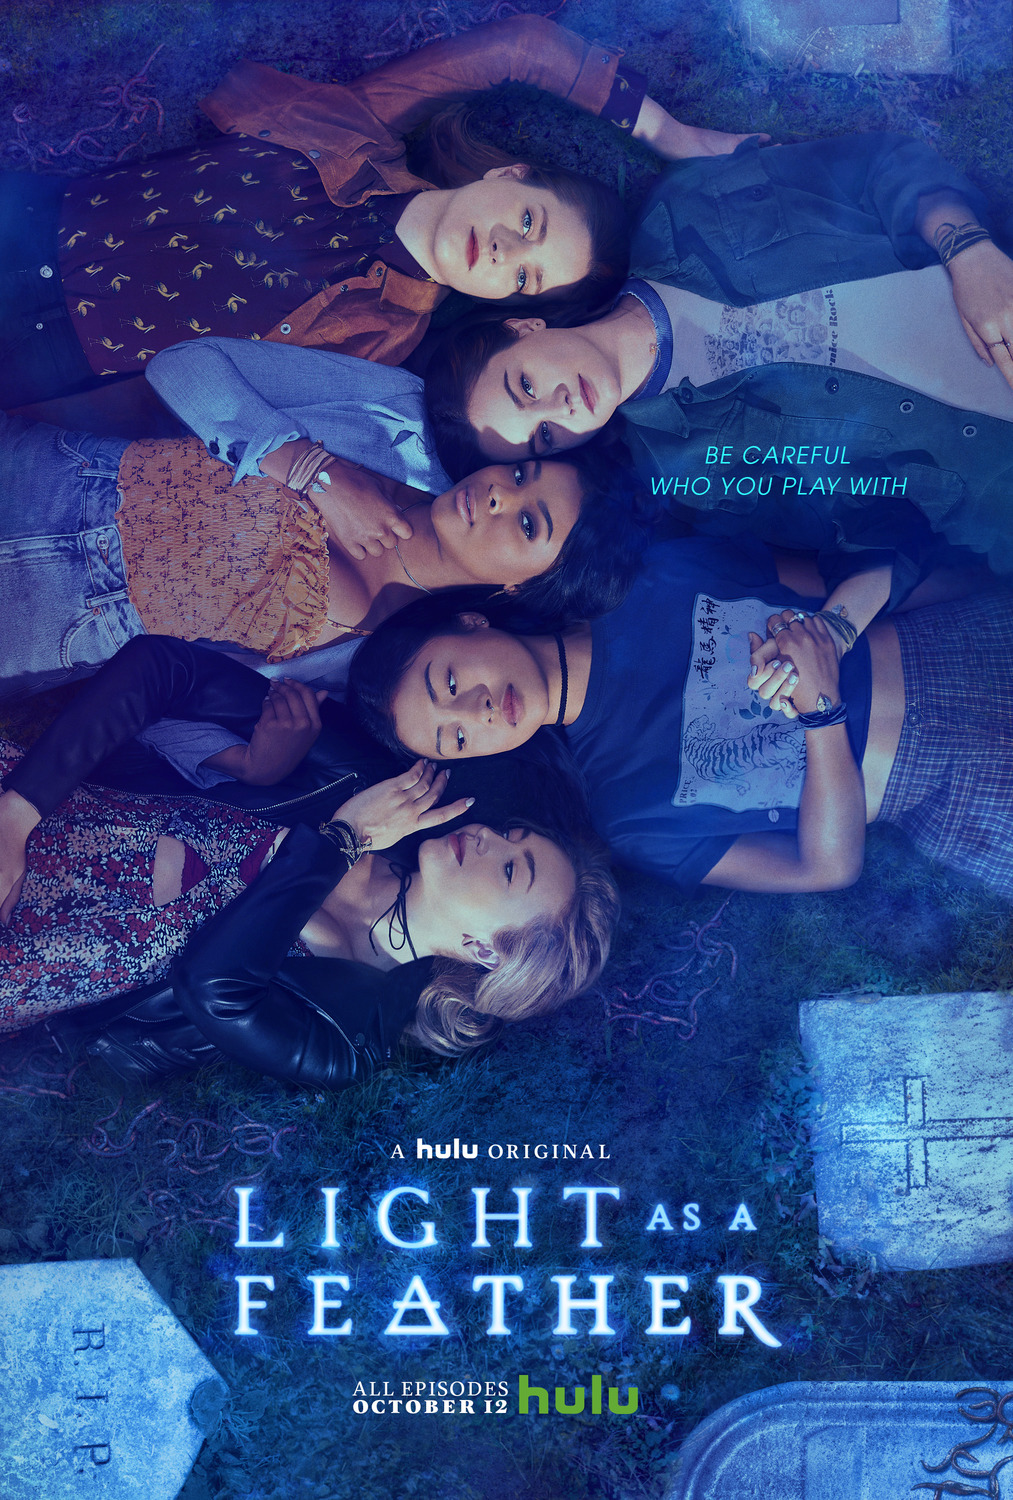 Light As A Feather Season 1 review: prepare to get witch slapped